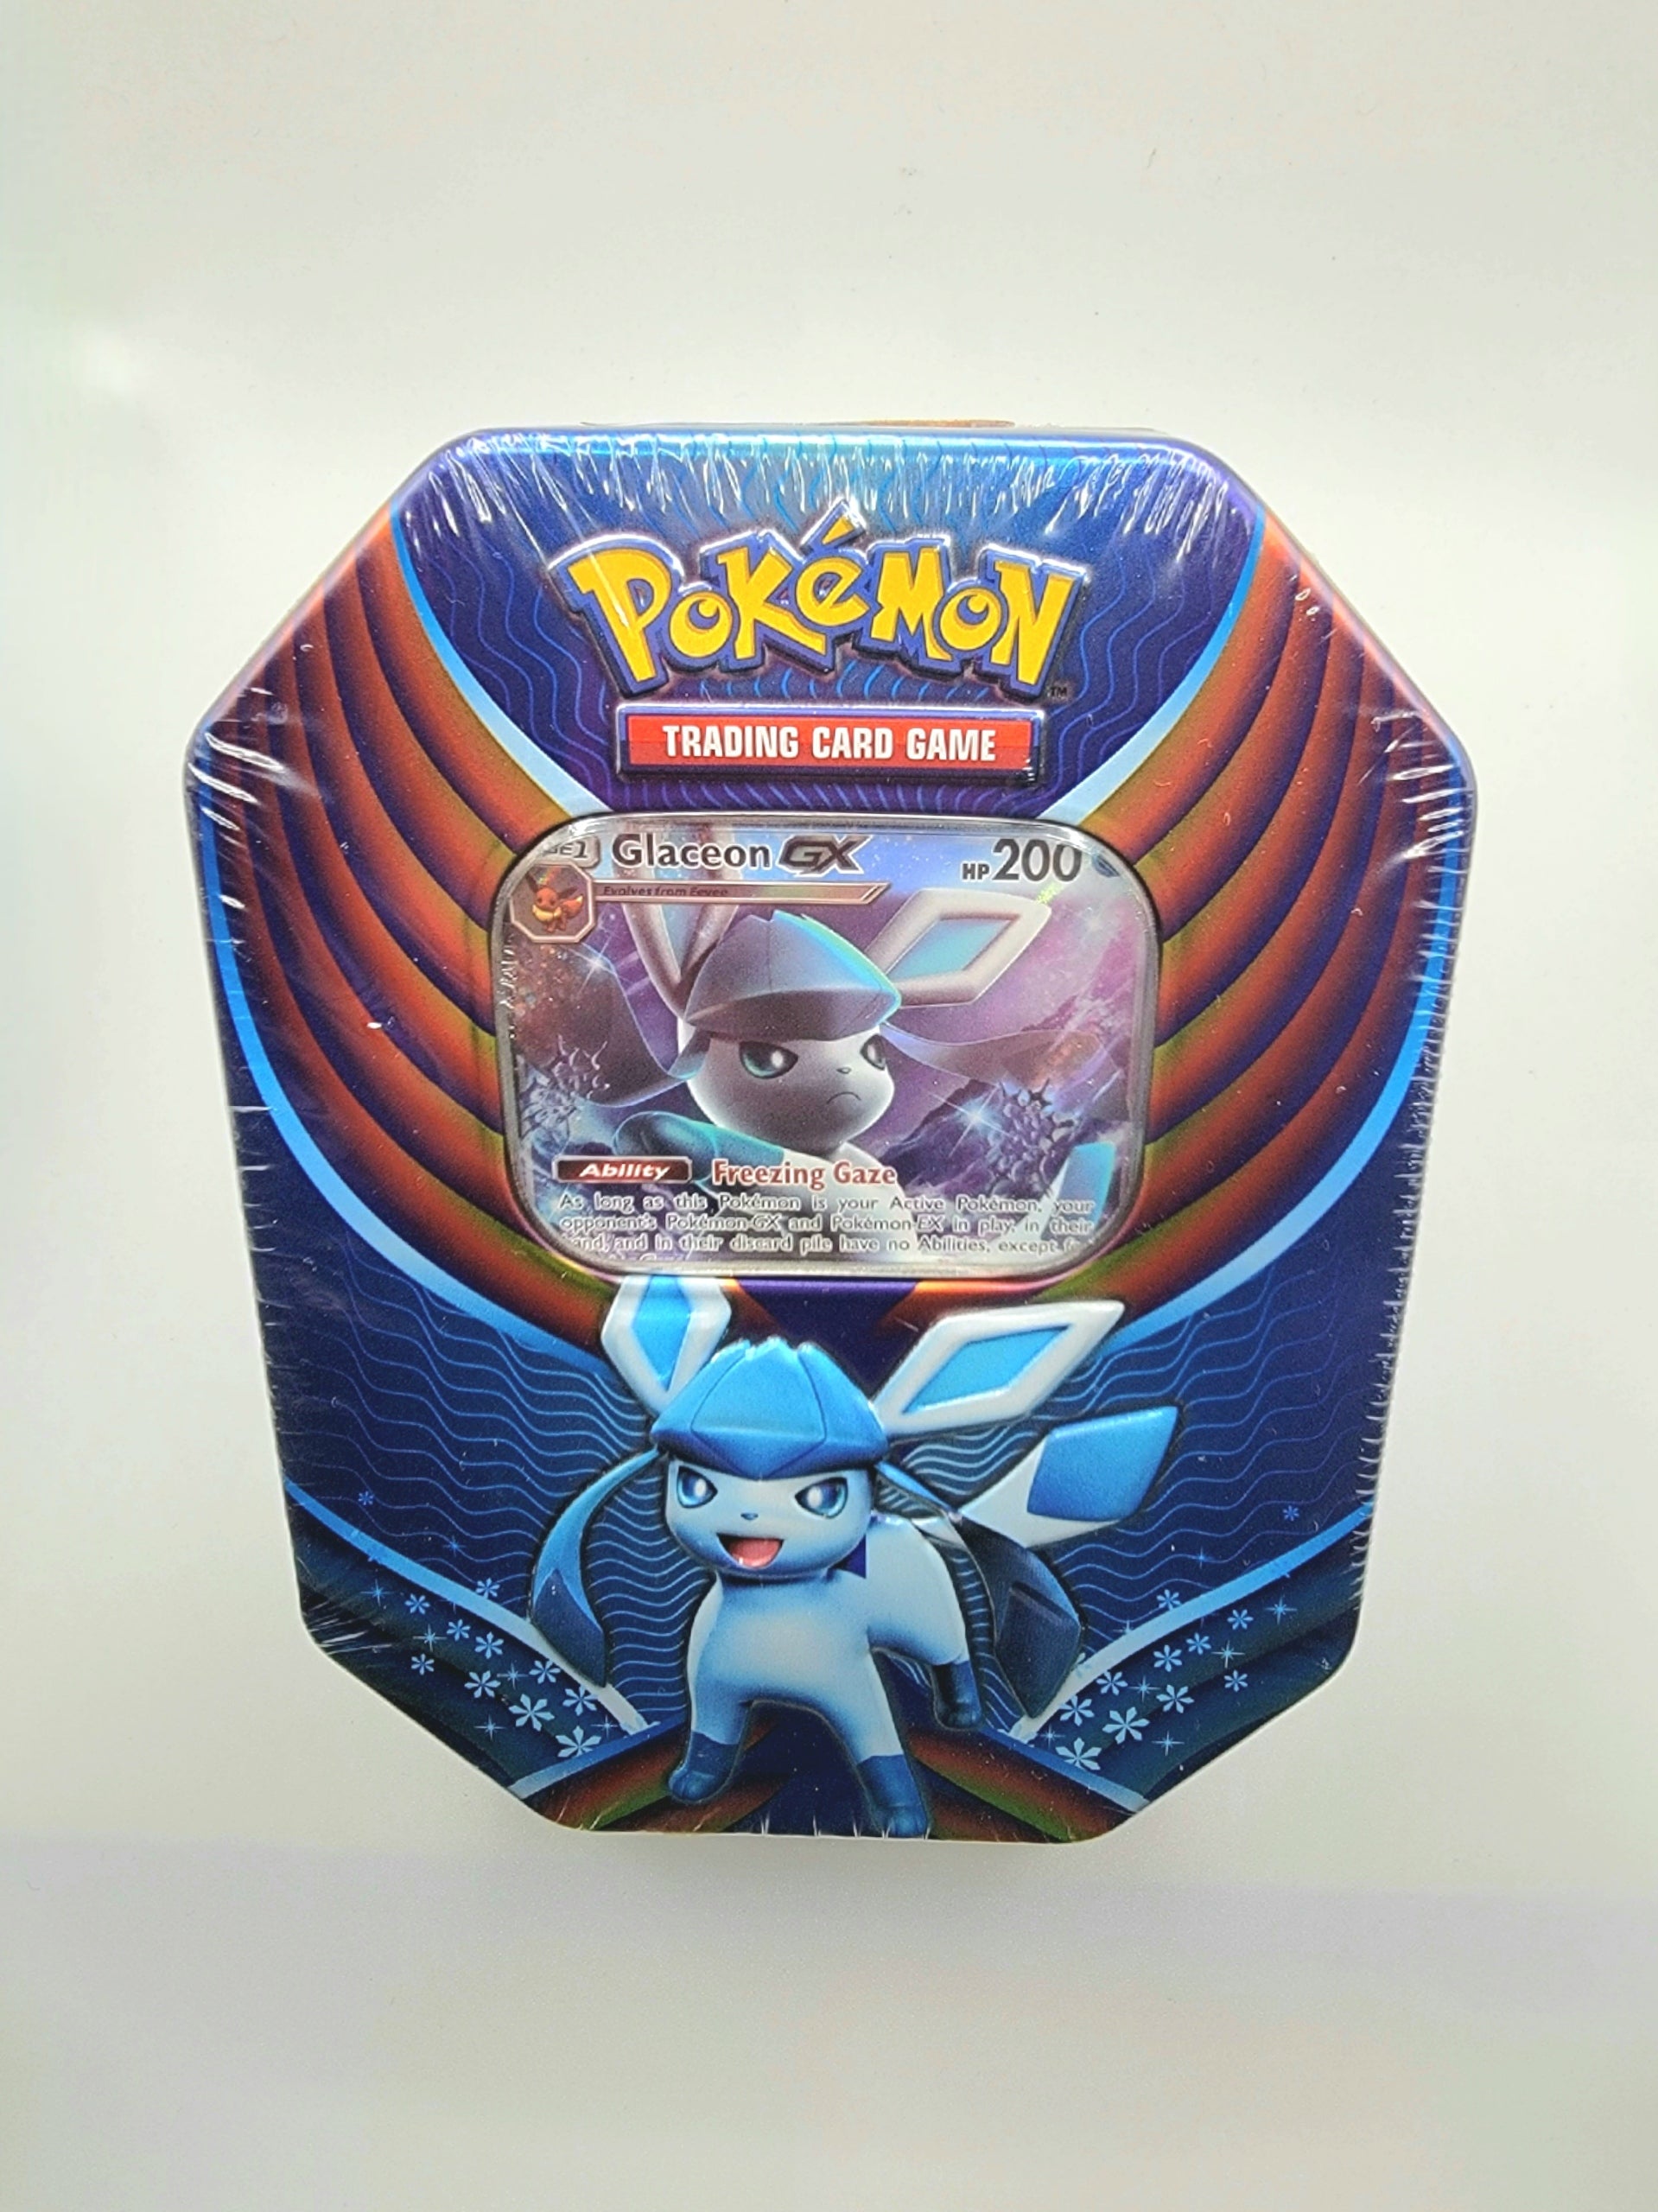 Each Glaceon GX tin includes 1 promo foil GX card, 4 TCG packs, and one online code card.